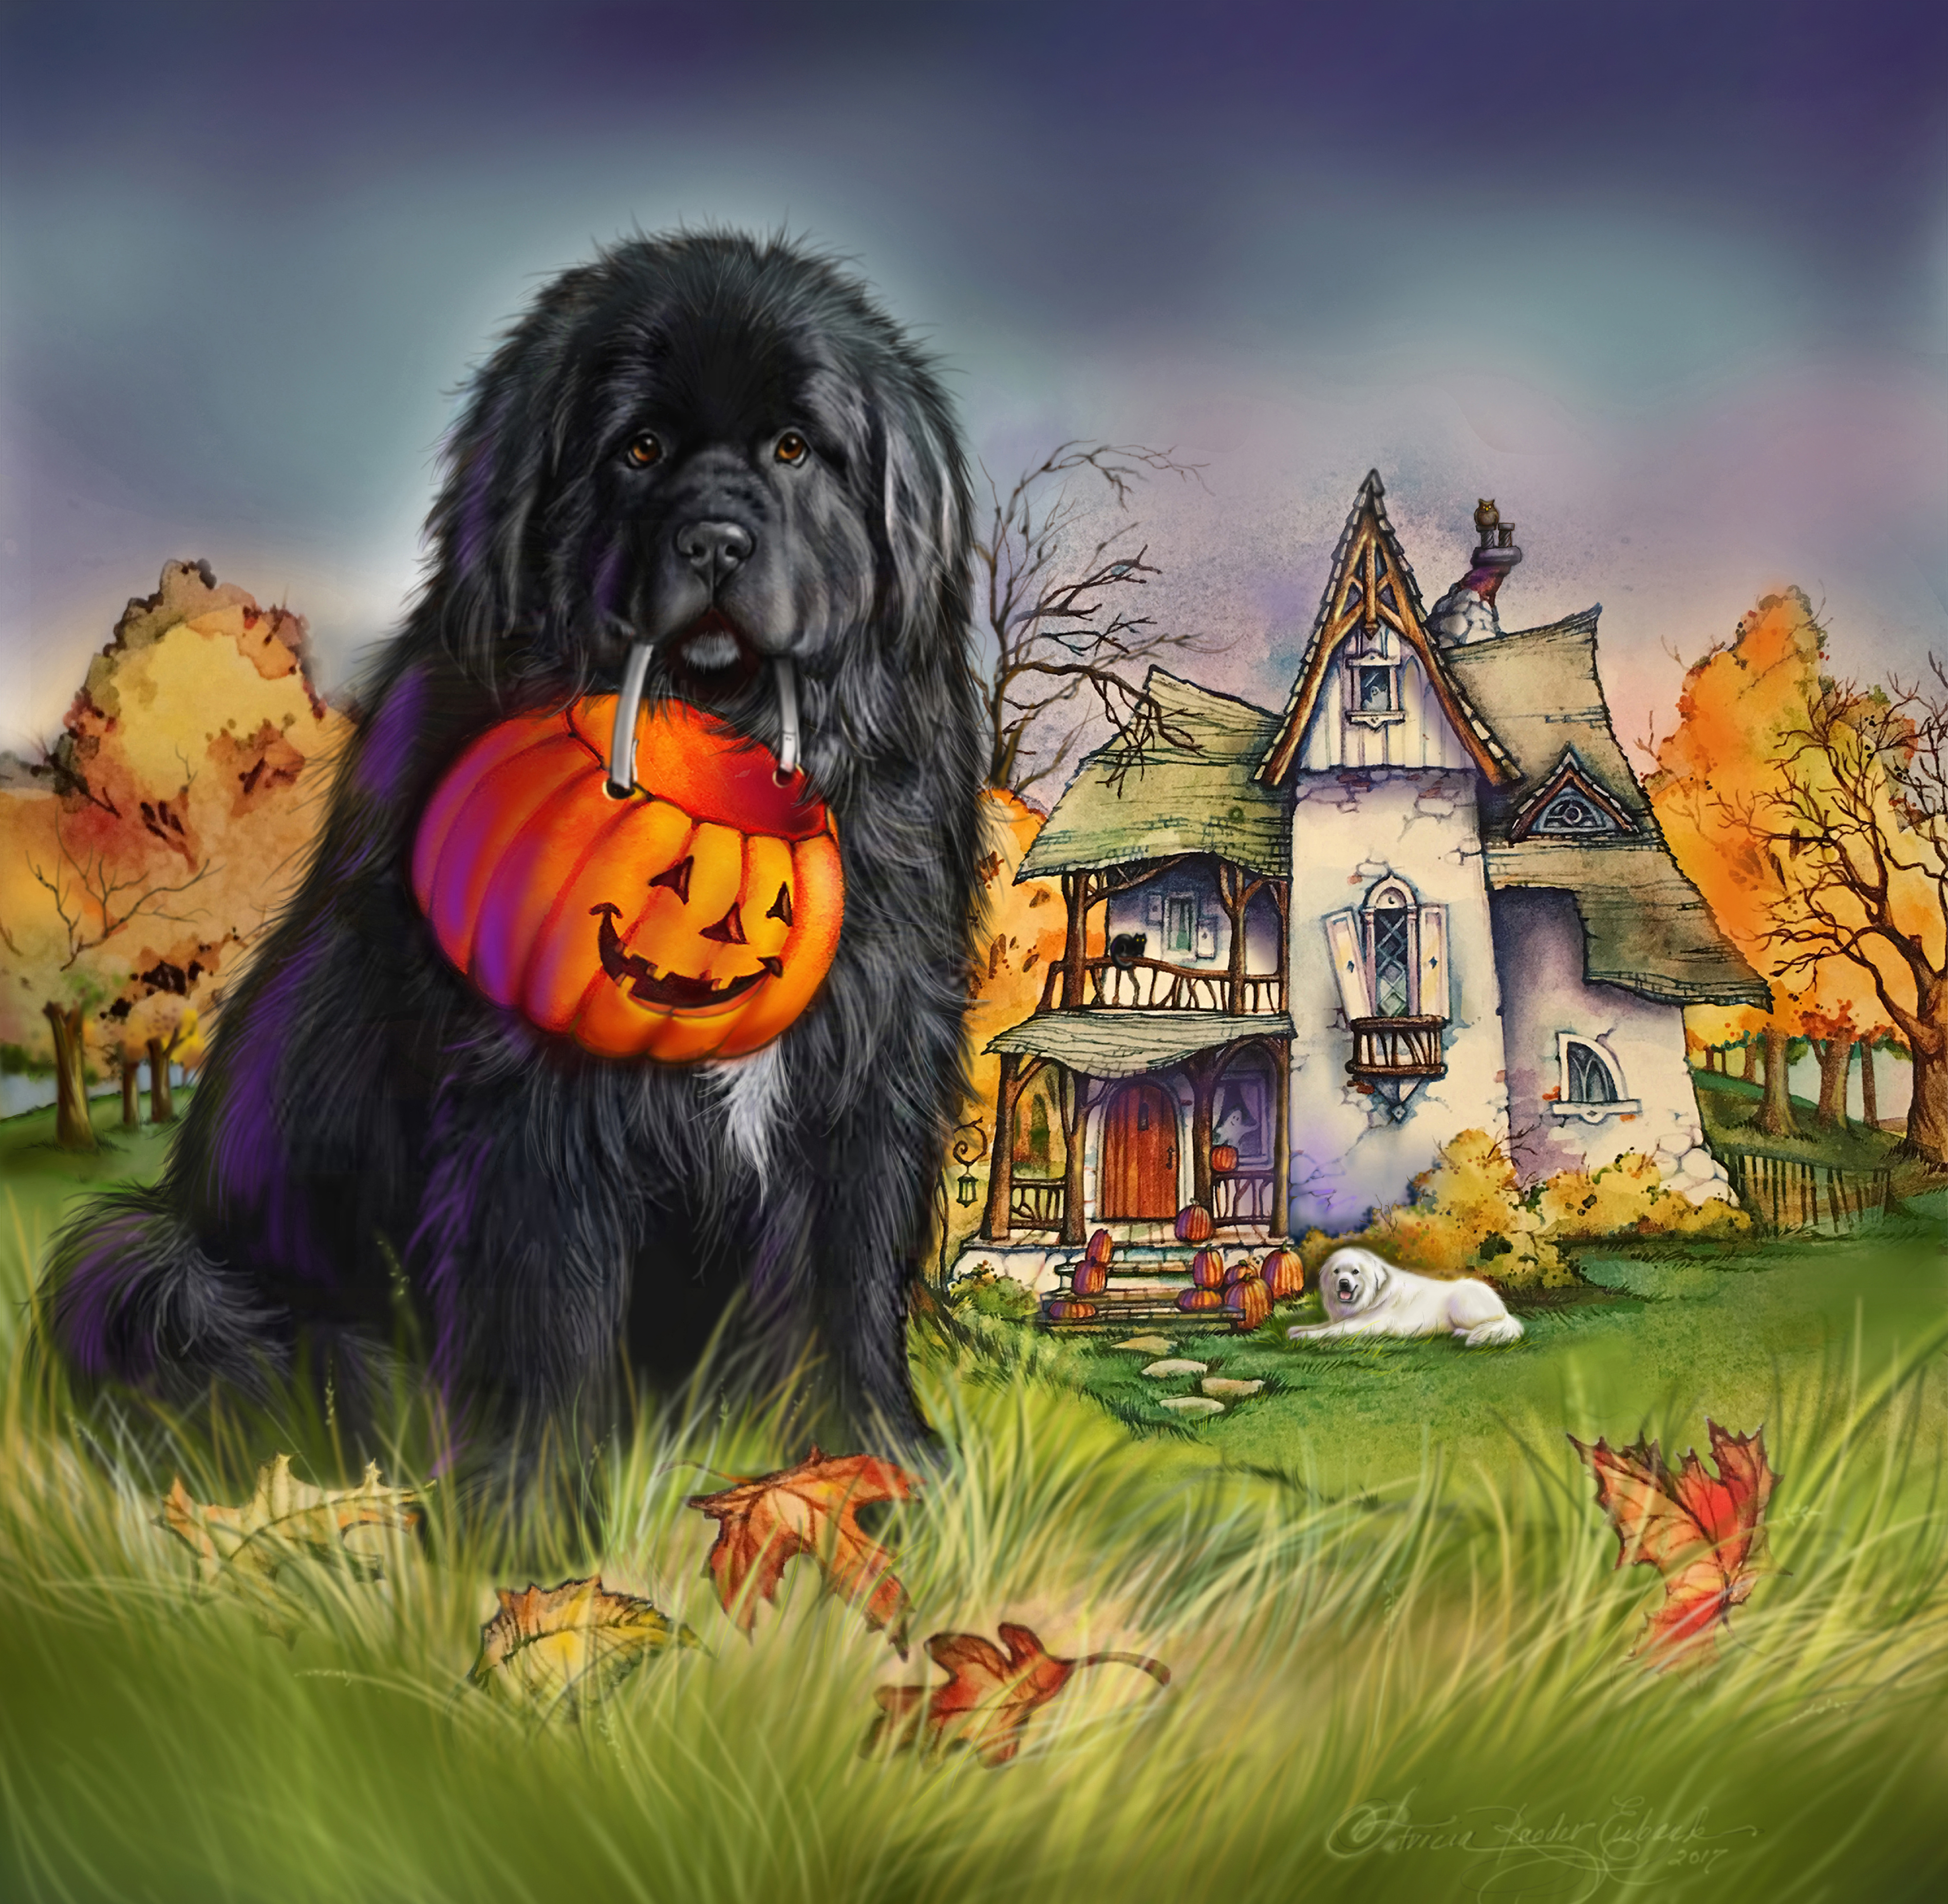 Newfie and the Halloween house